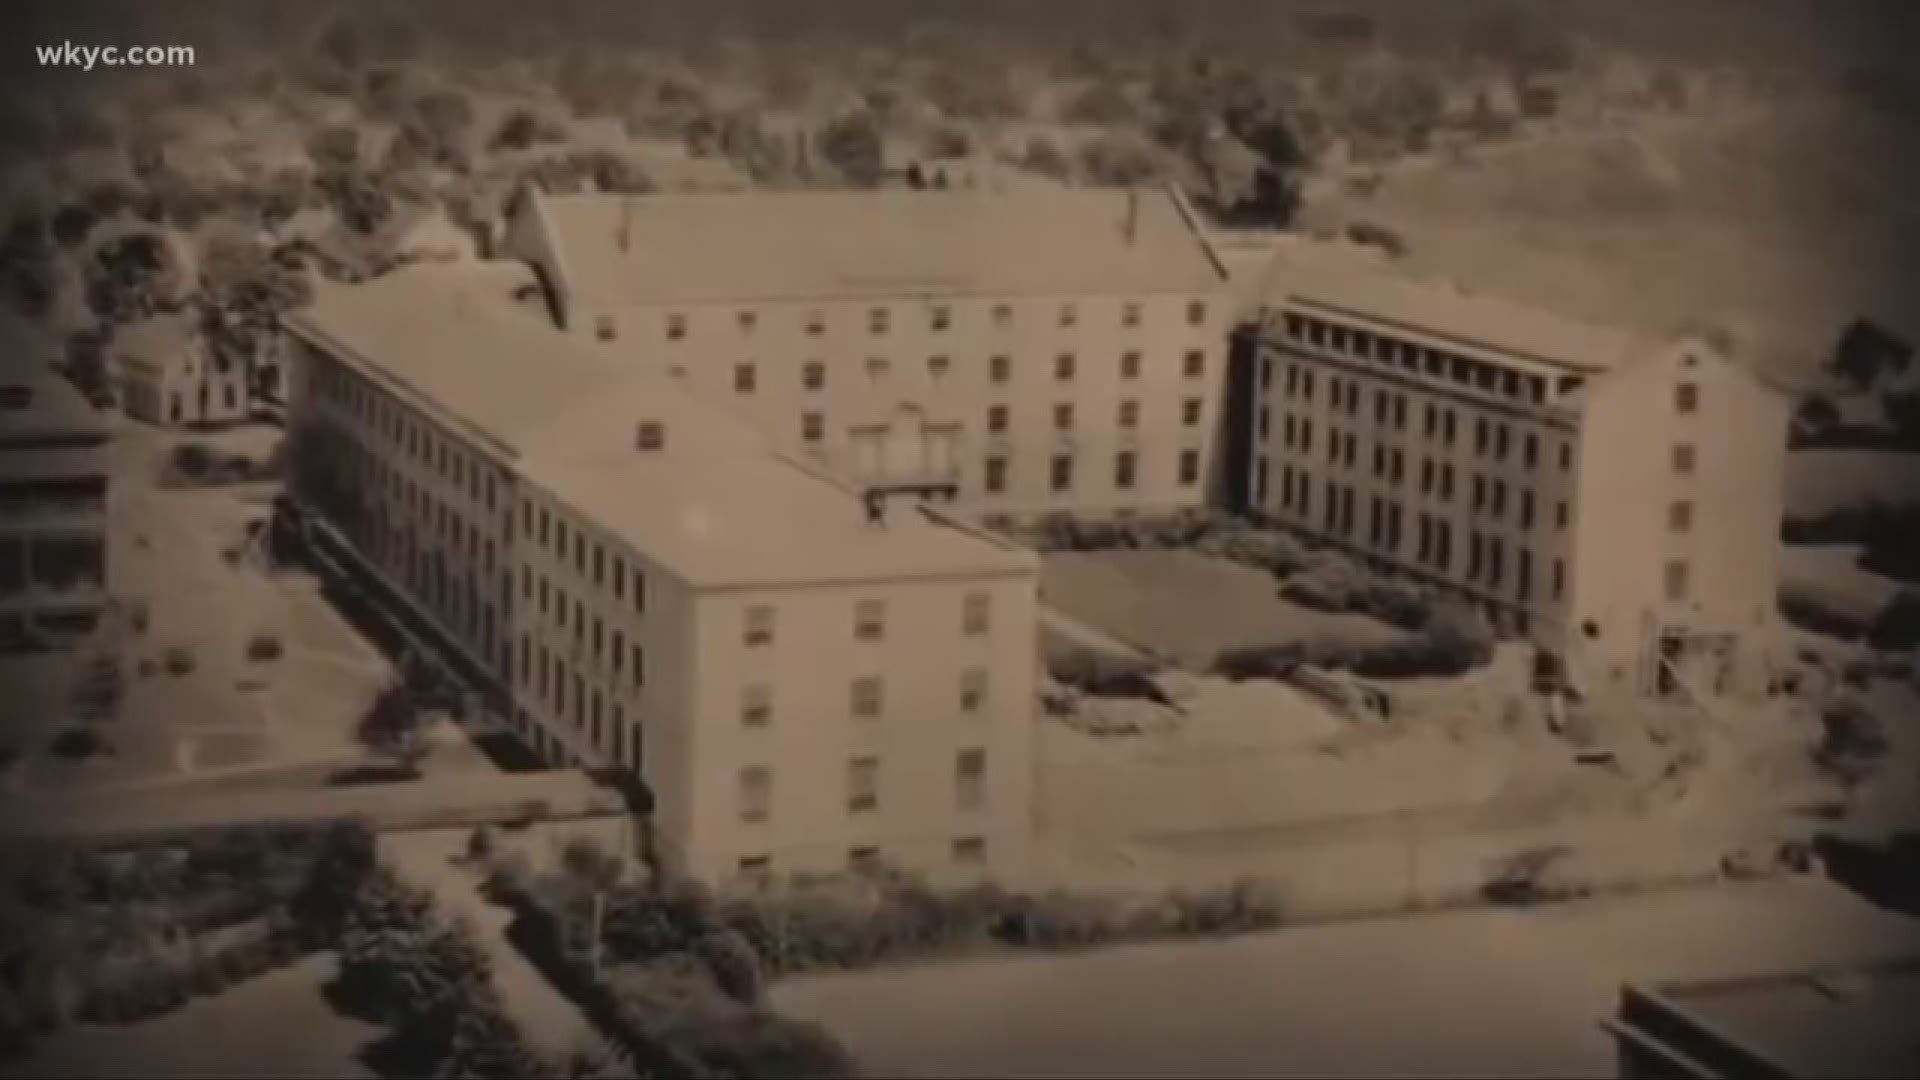 As MetroHealth prepares to break ground on new hospital, here's a look back at its history